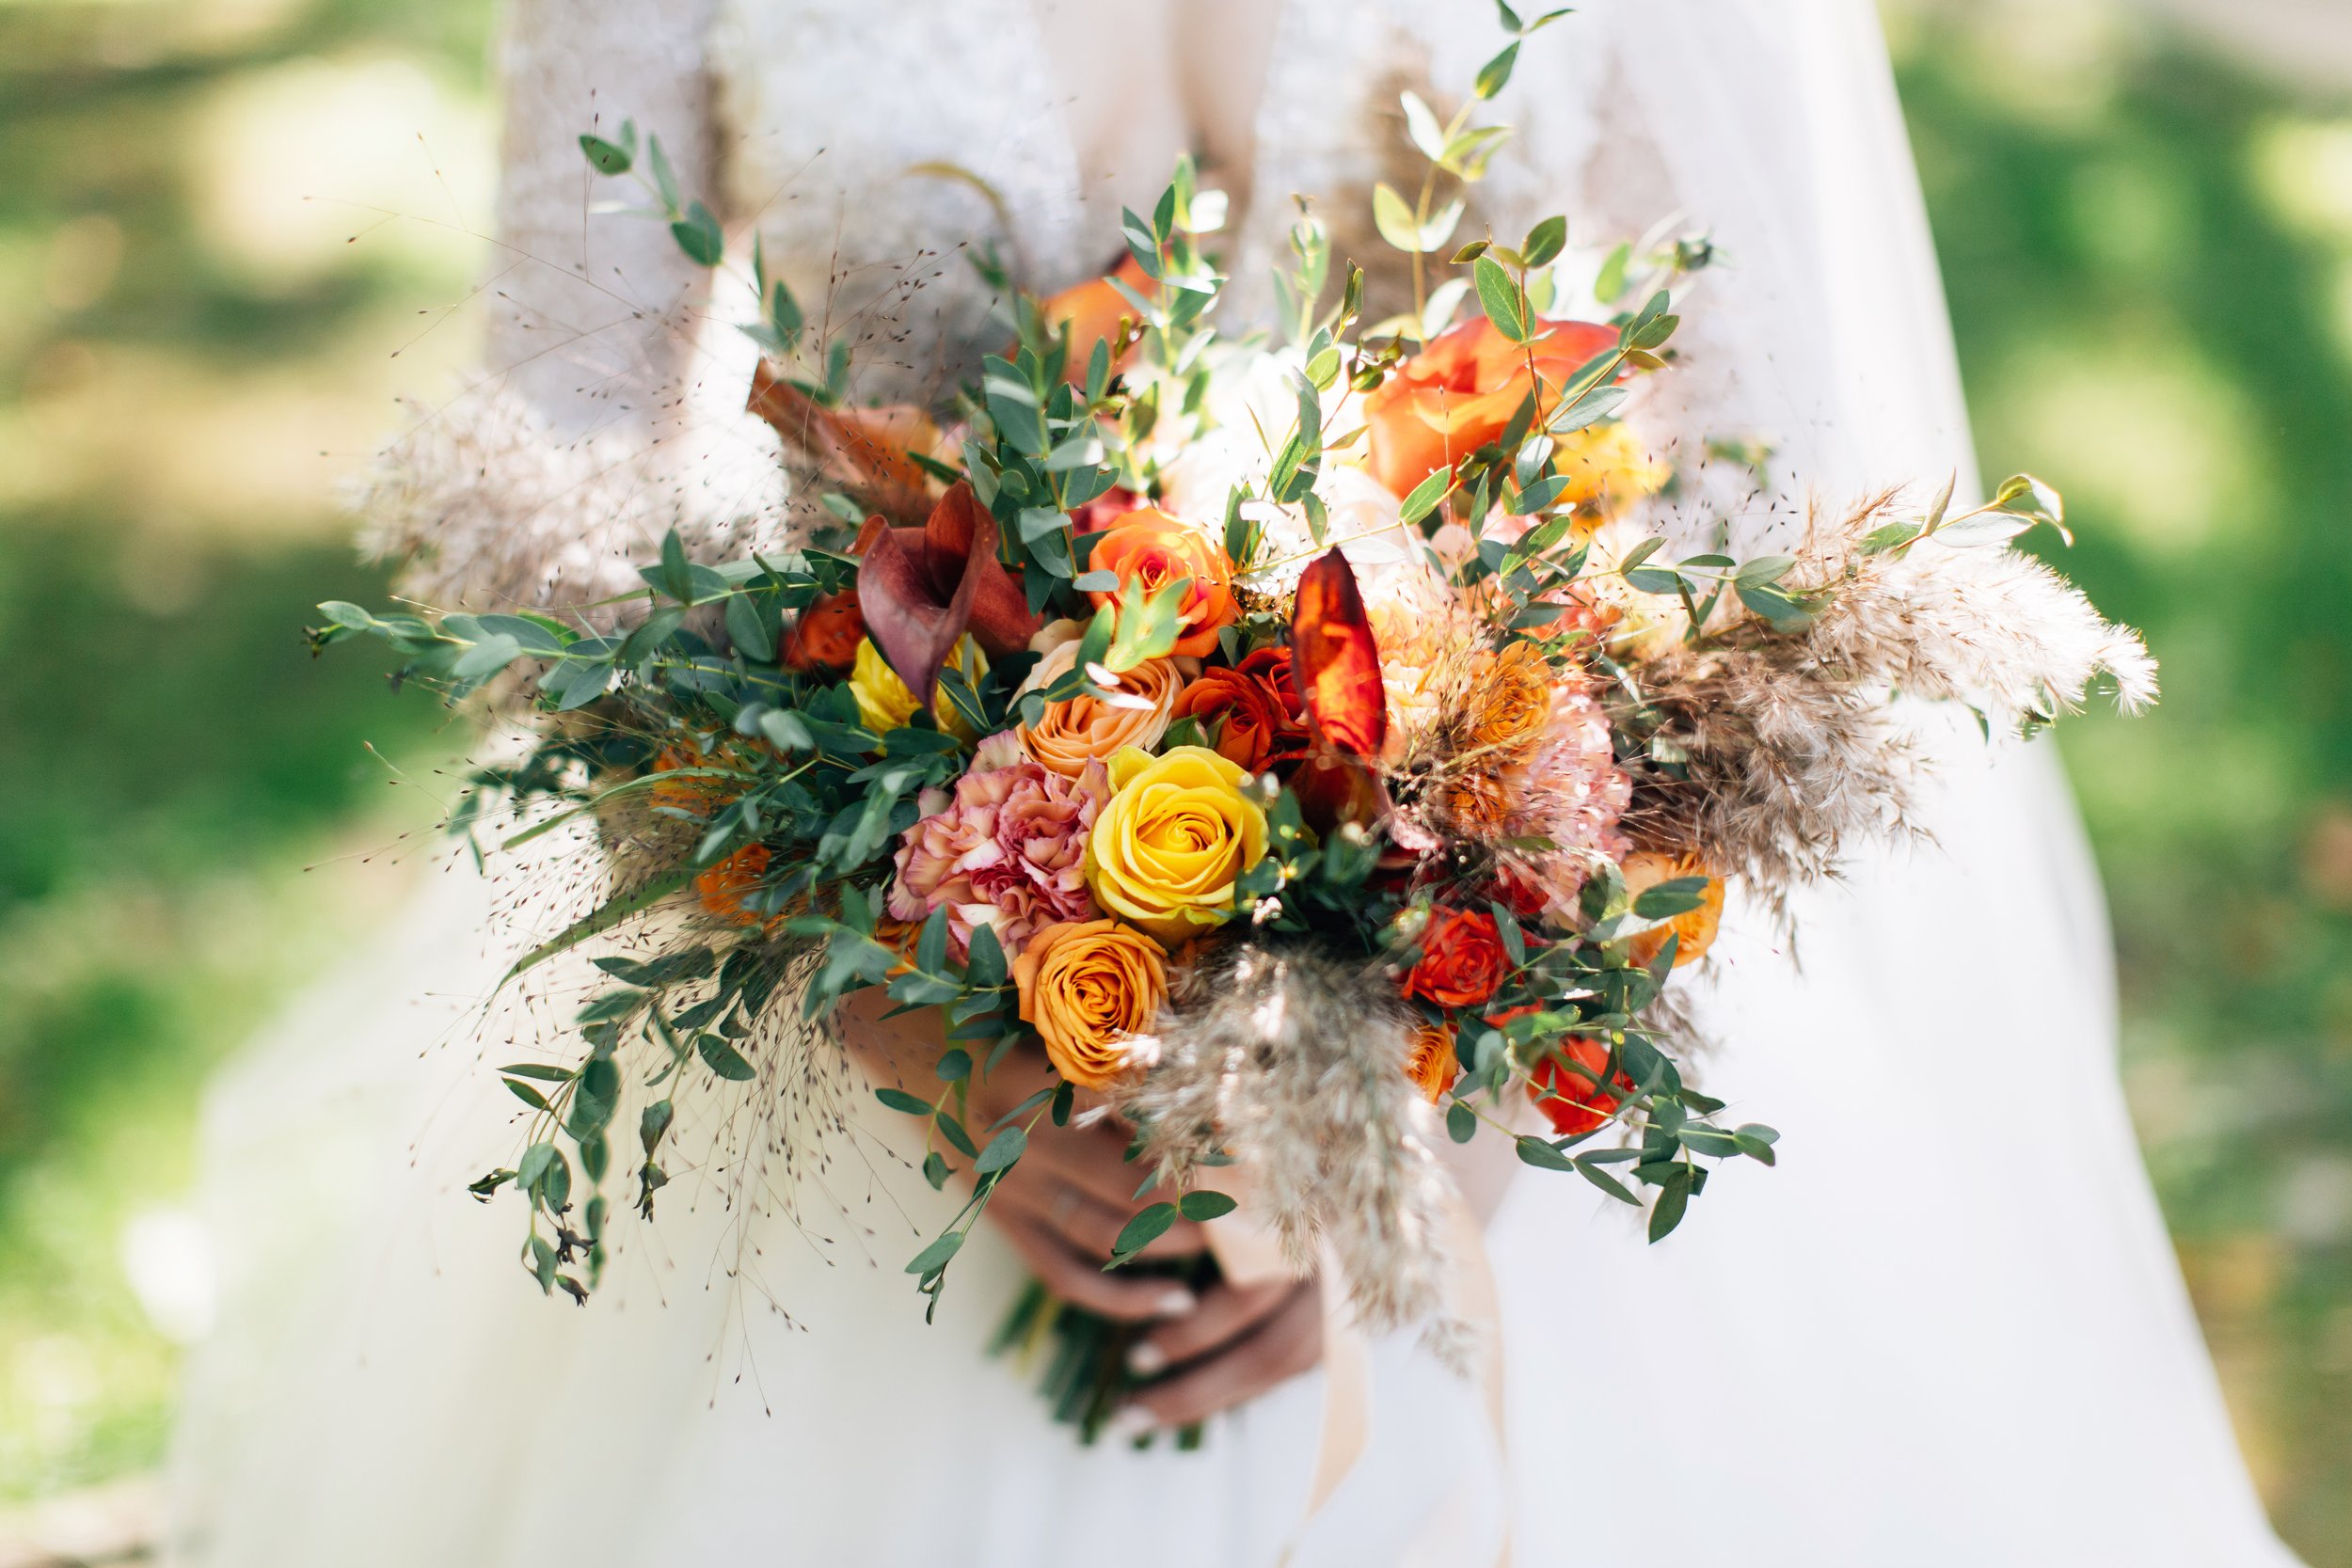 The Fun and Fascinating History of Wedding Flowers: From Garlic Bouquets to the Language of Flowers